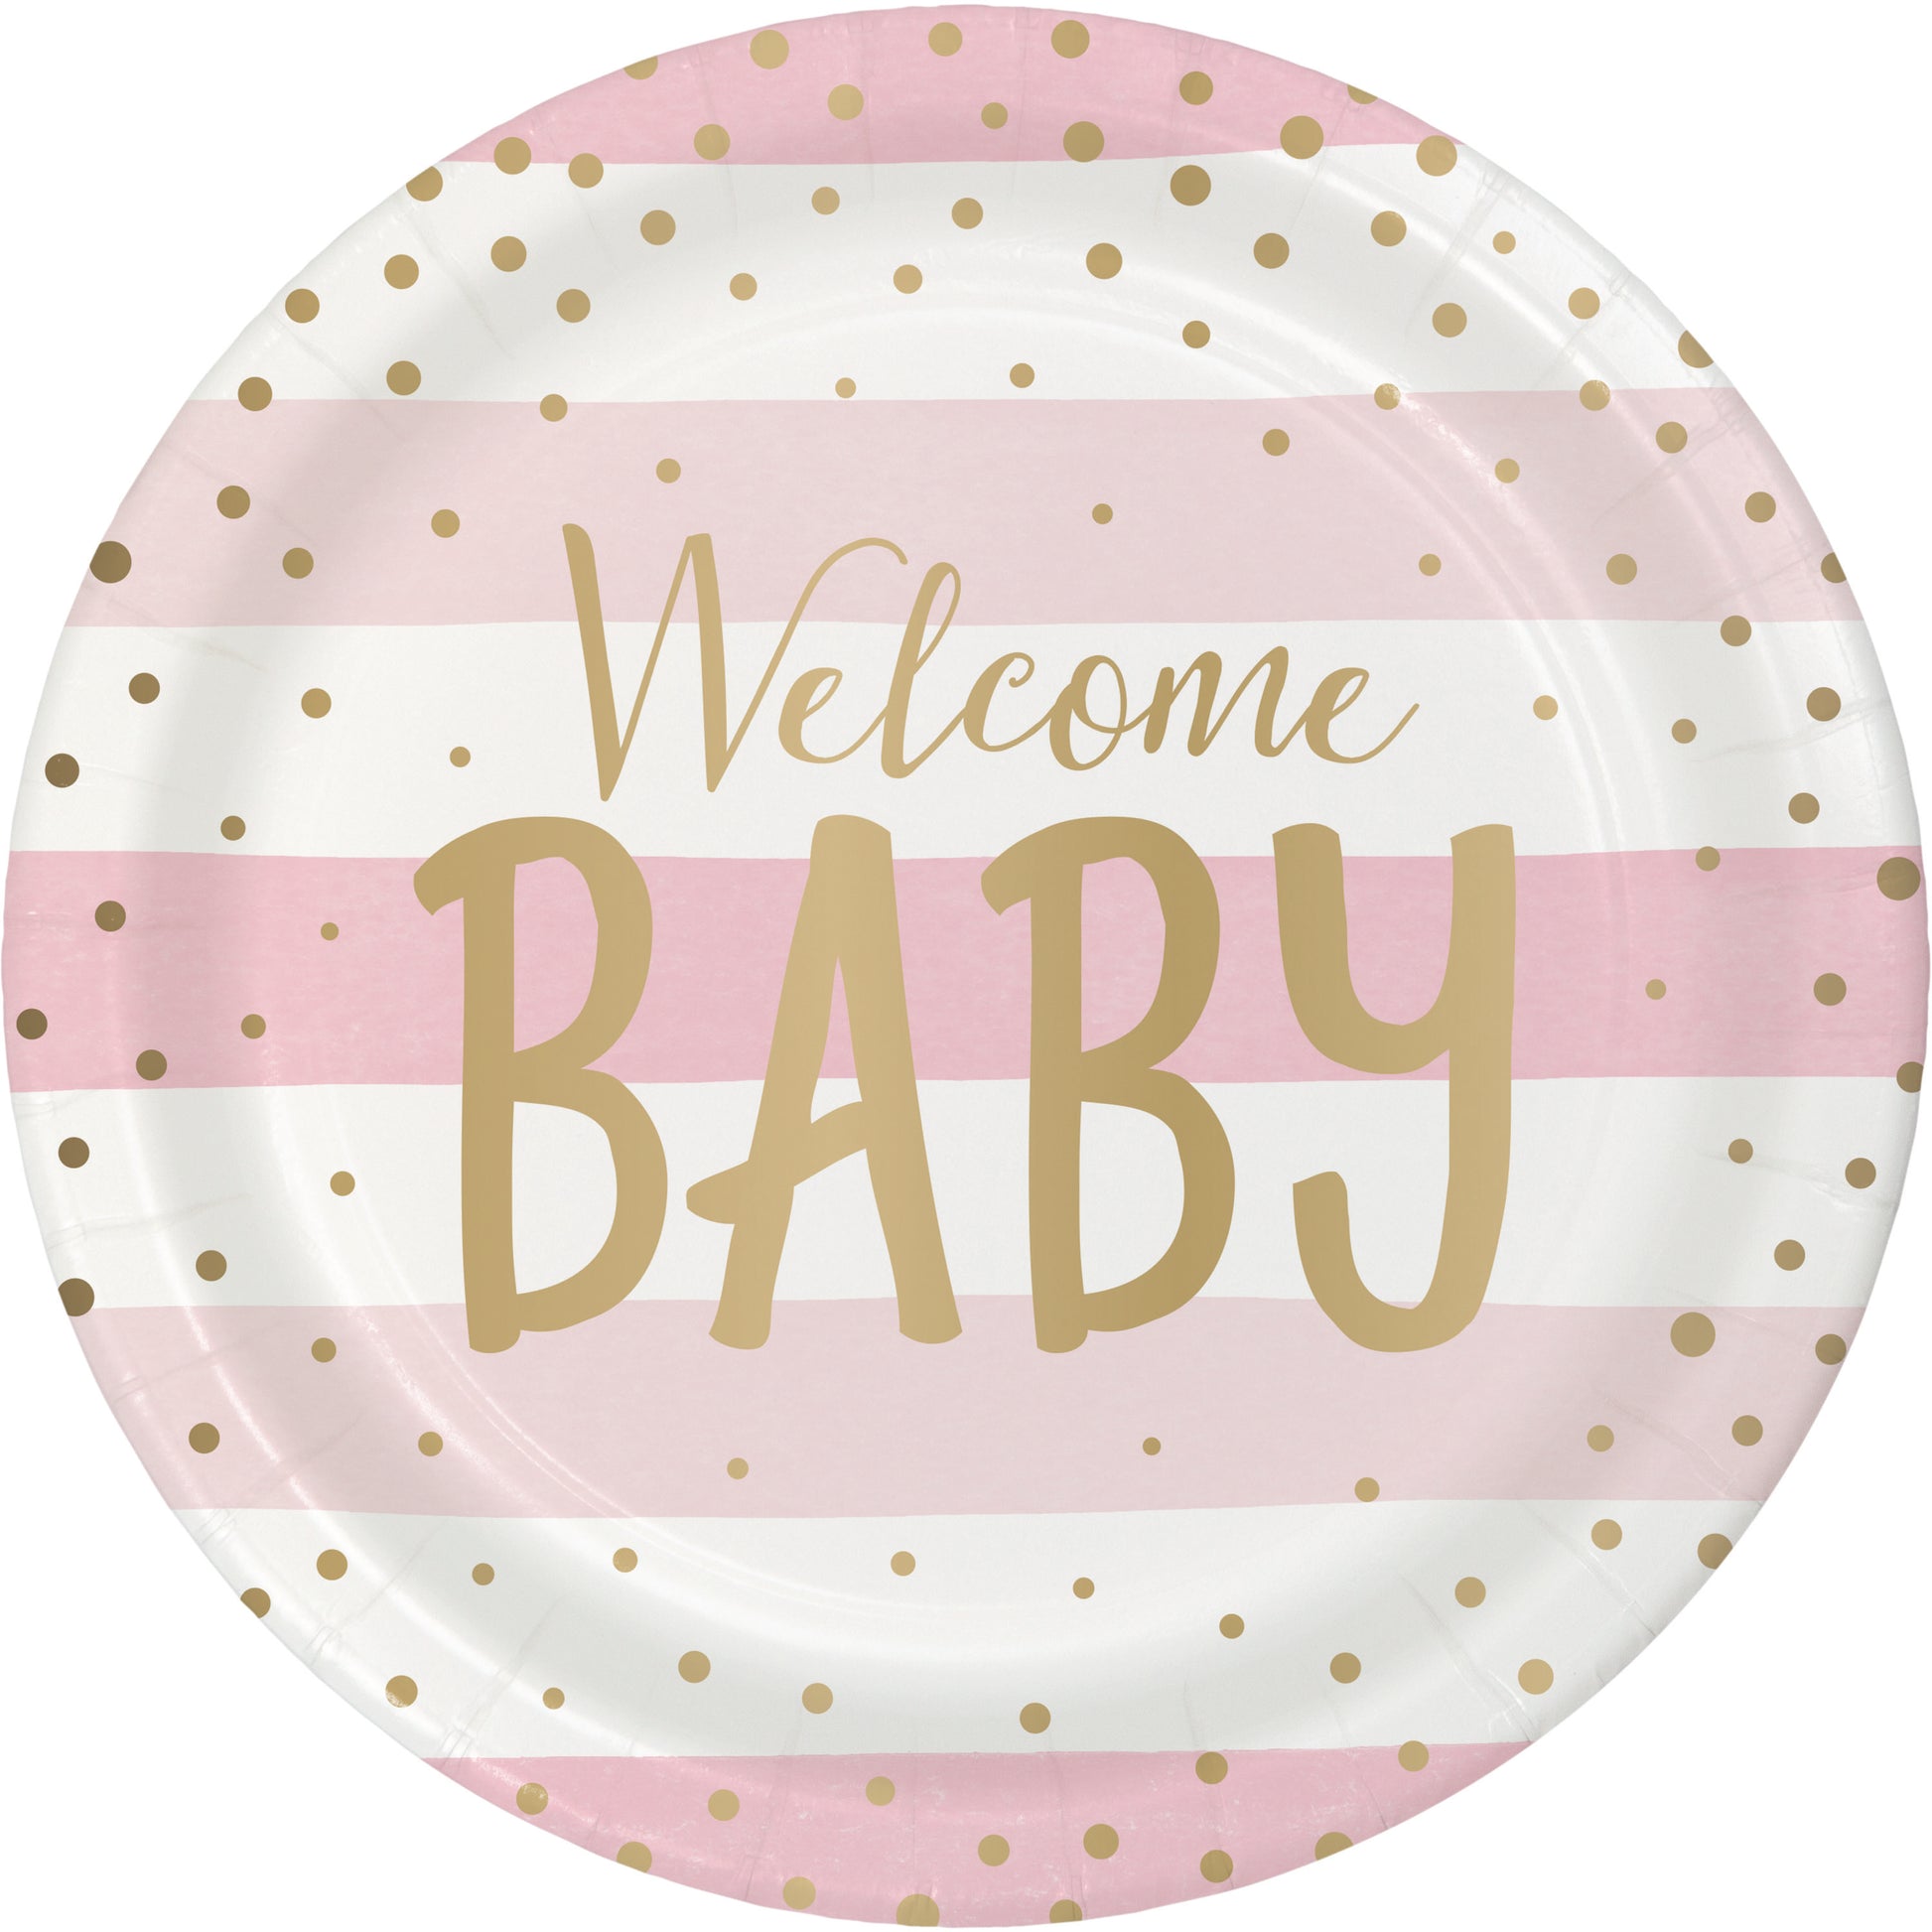 baby shower plate with pink and white stripes, welcome baby written in gold with gold polka dots